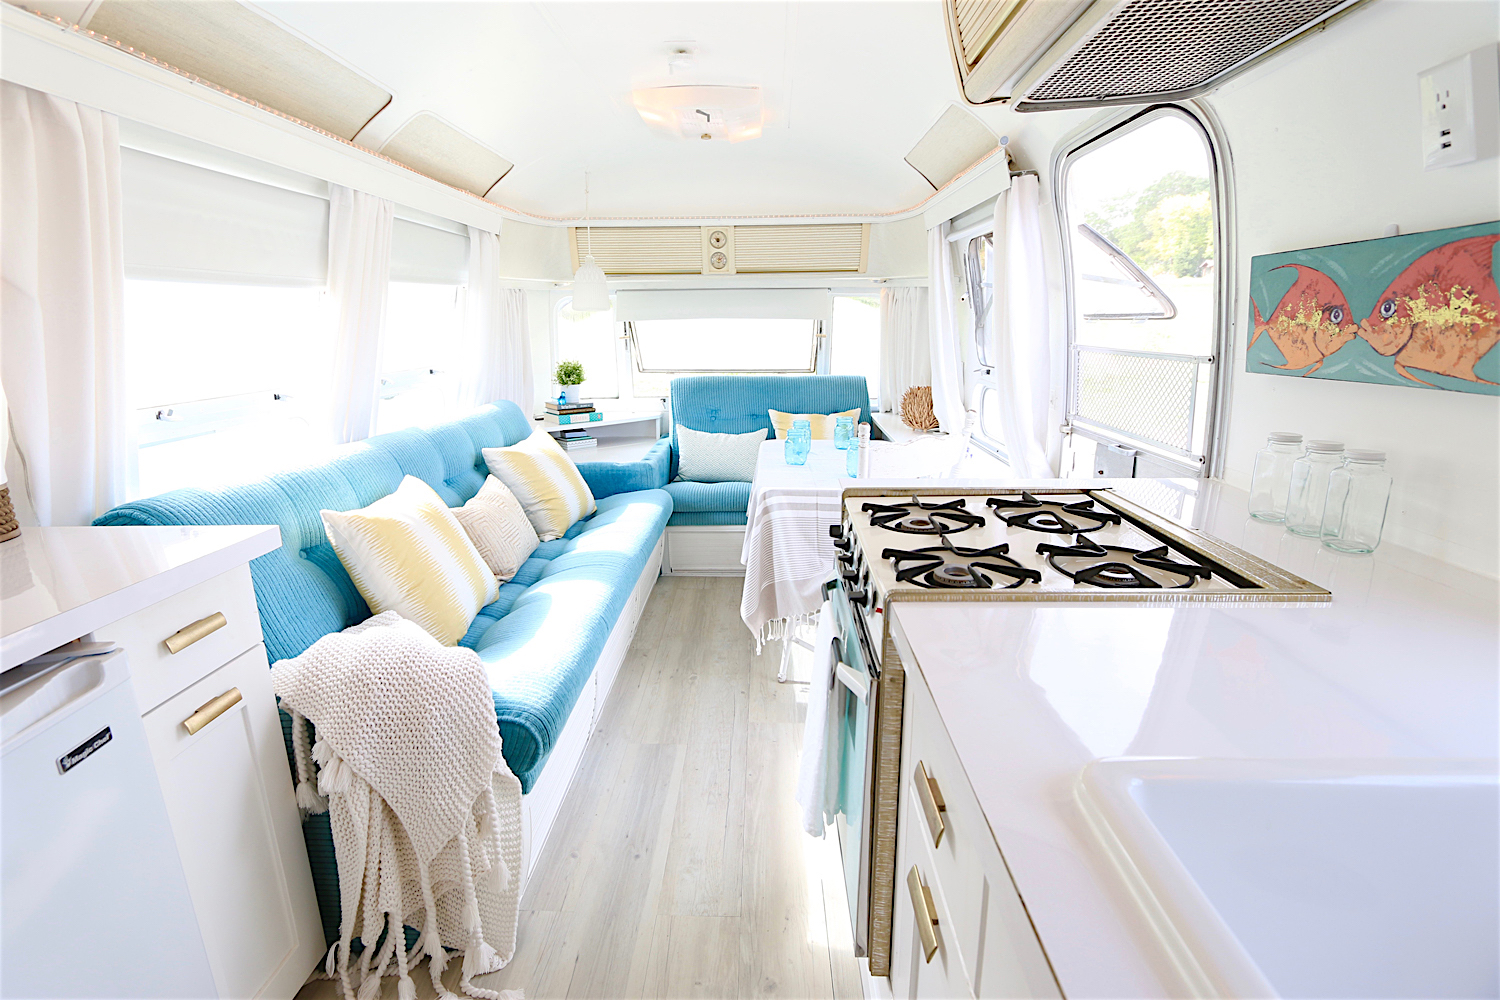 Love airstreams? Click on the photo to see the before and after transformation of a vintage 1976 31 ft airstream!